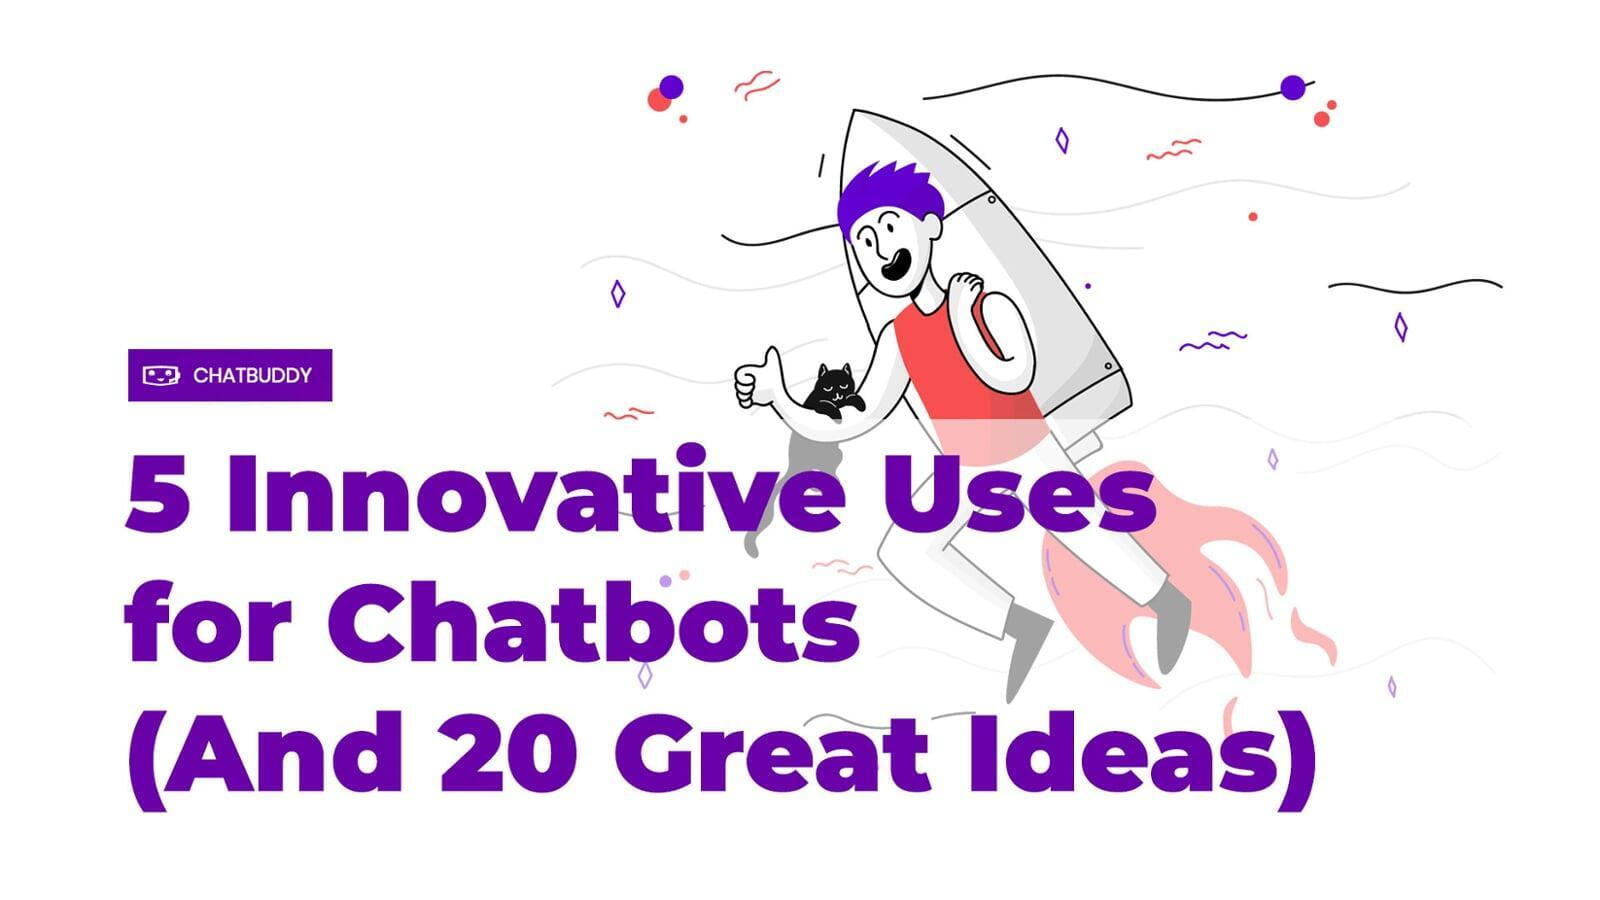 5 Innovative Uses for Chatbots (And 20 Great Ideas)